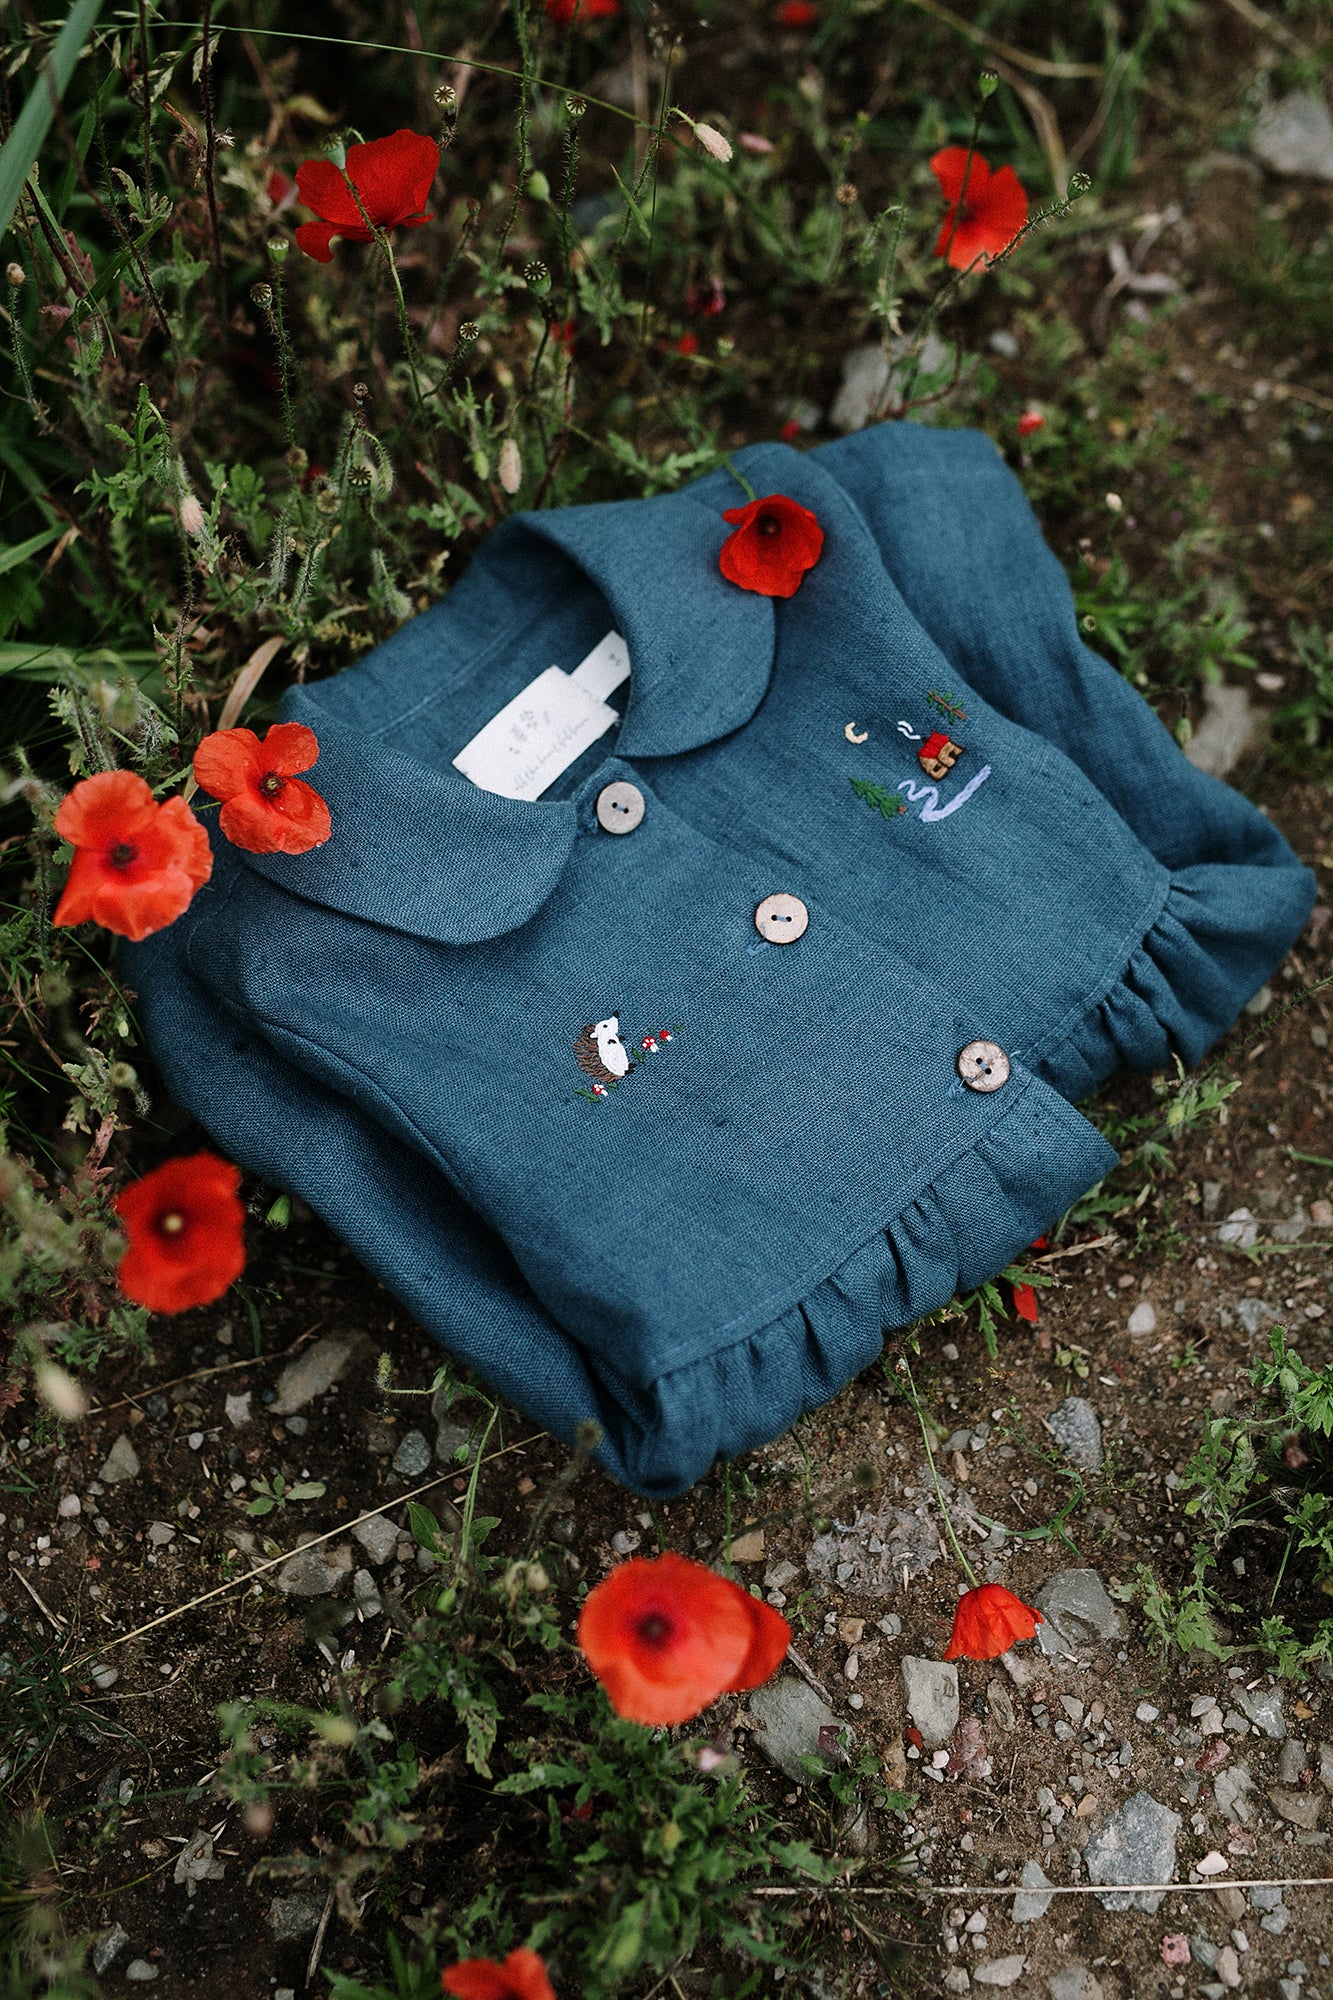 a blue shirt with buttons on it laying in a field of flowers